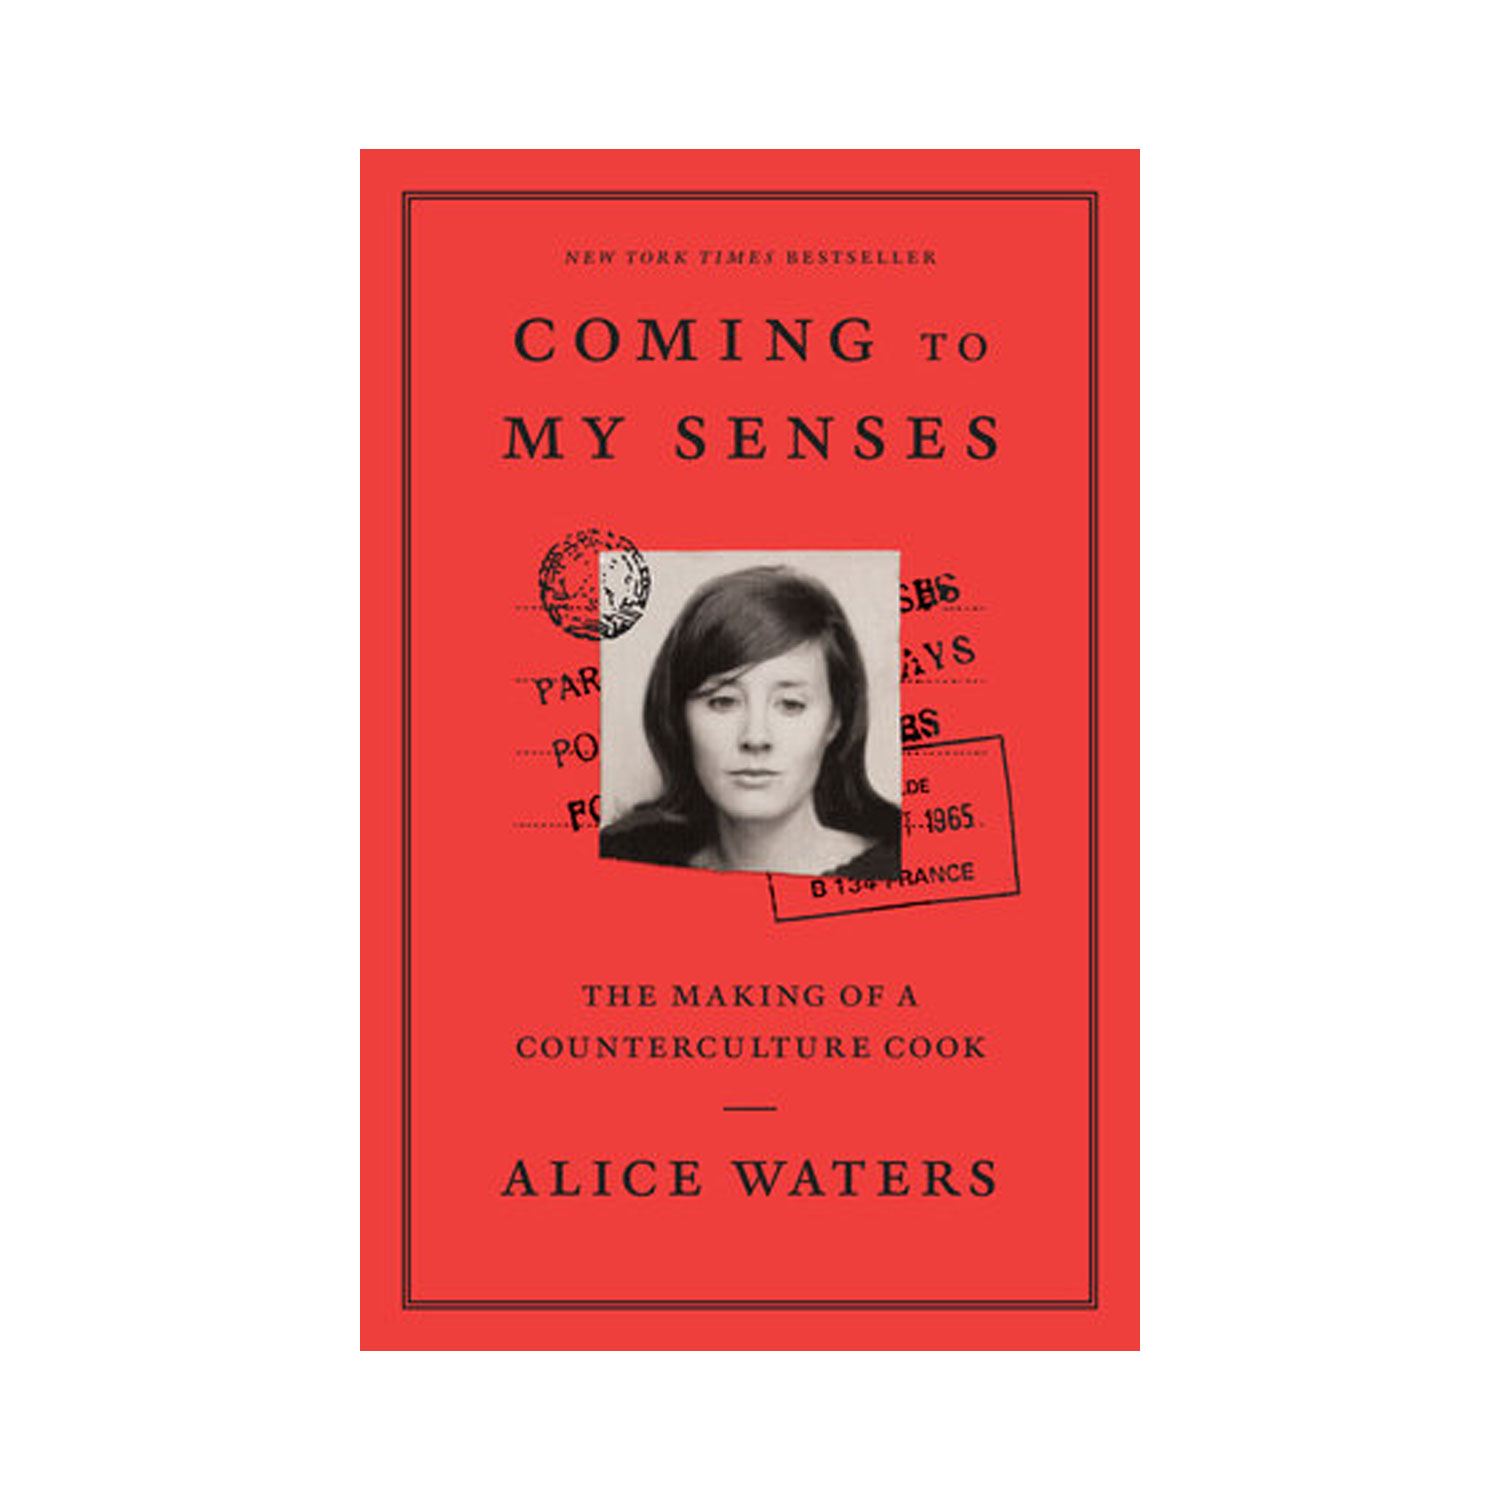 COMING TO MY SENSES BY ALICE WATERS